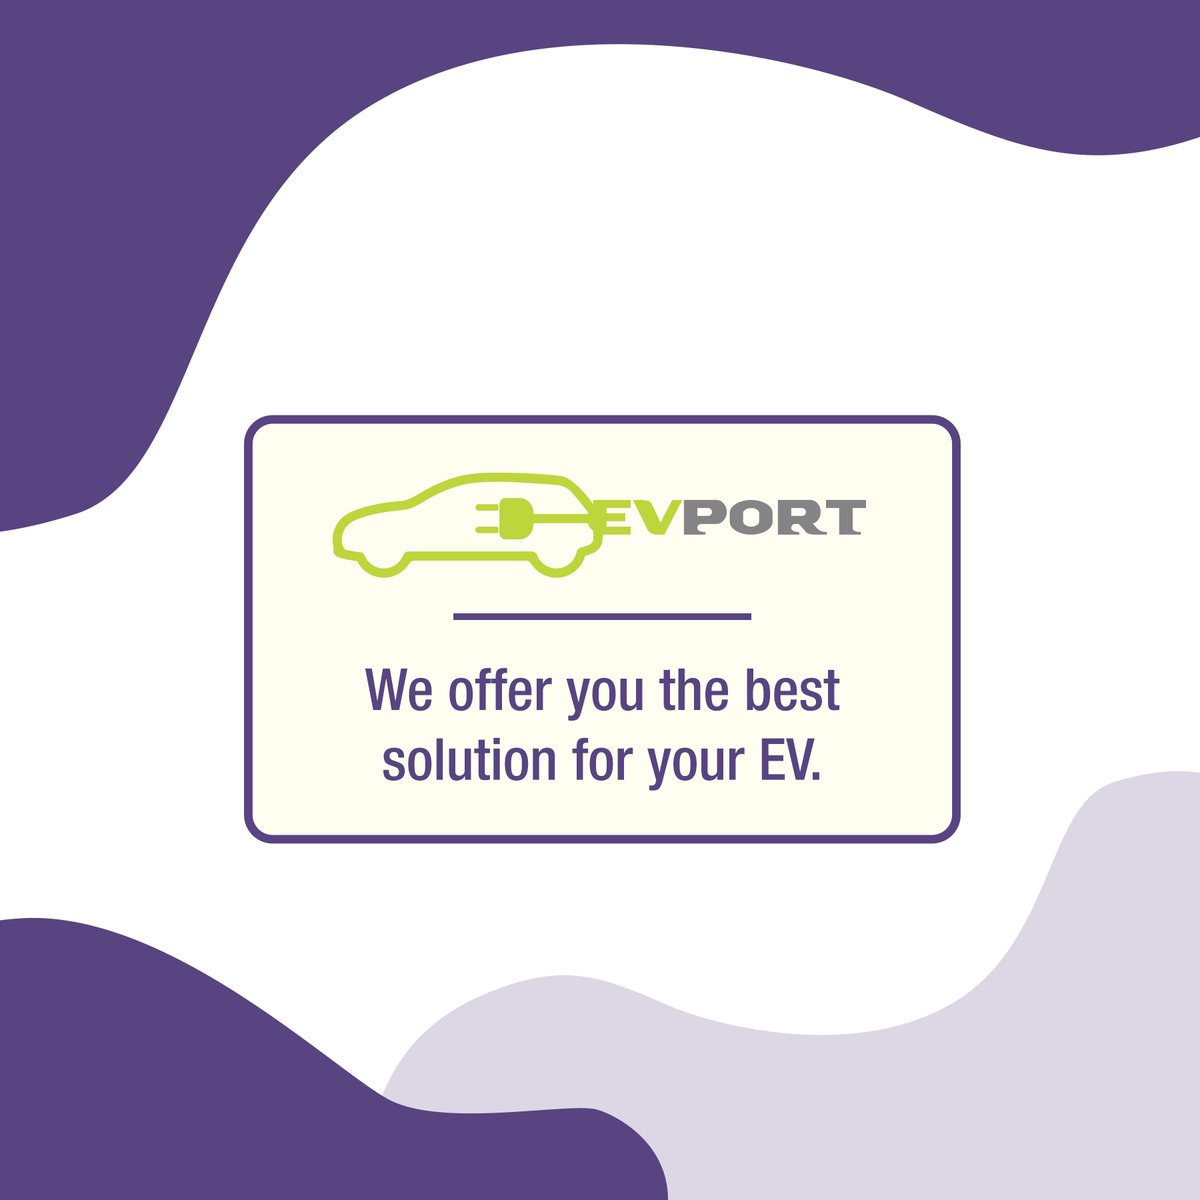 A complete portal for your electric vehicles. Here at EV Port, we provide a comparison service for Electric Vehicle Charging Points. Know more: evport.co.uk
.
.
.
#portal #electricvehicles #provideservice #chargingpoints #B2B #evport